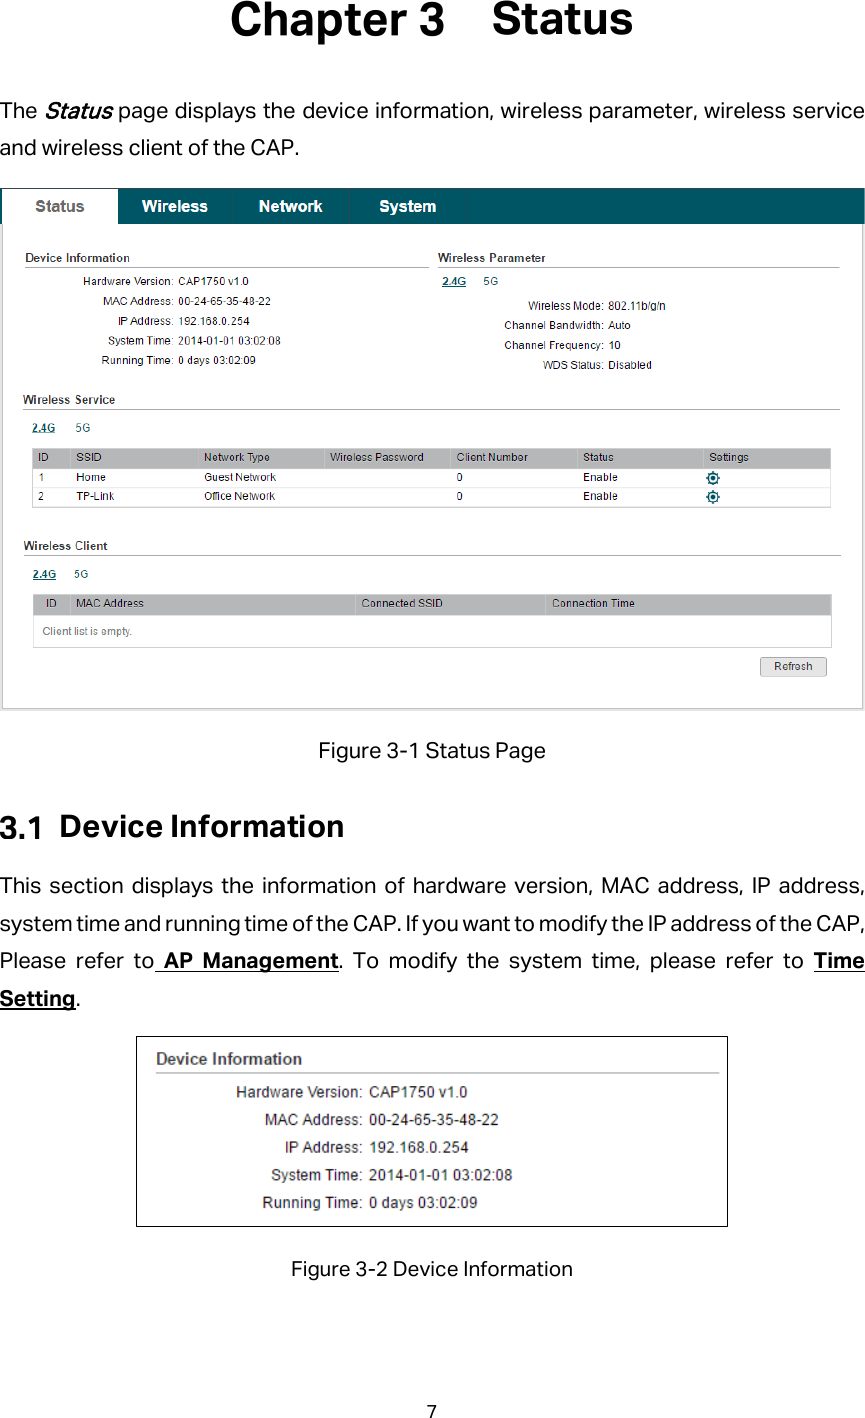  Status The Status page displays the device information, wireless parameter, wireless service and wireless client of the CAP.  Figure 3-1 Status Page  Device Information This section displays the information of hardware version, MAC address, IP address, system time and running time of the CAP. If you want to modify the IP address of the CAP, Please refer to AP Management. To modify the system time, please refer to Time Setting.  Figure 3-2 Device Information 7  